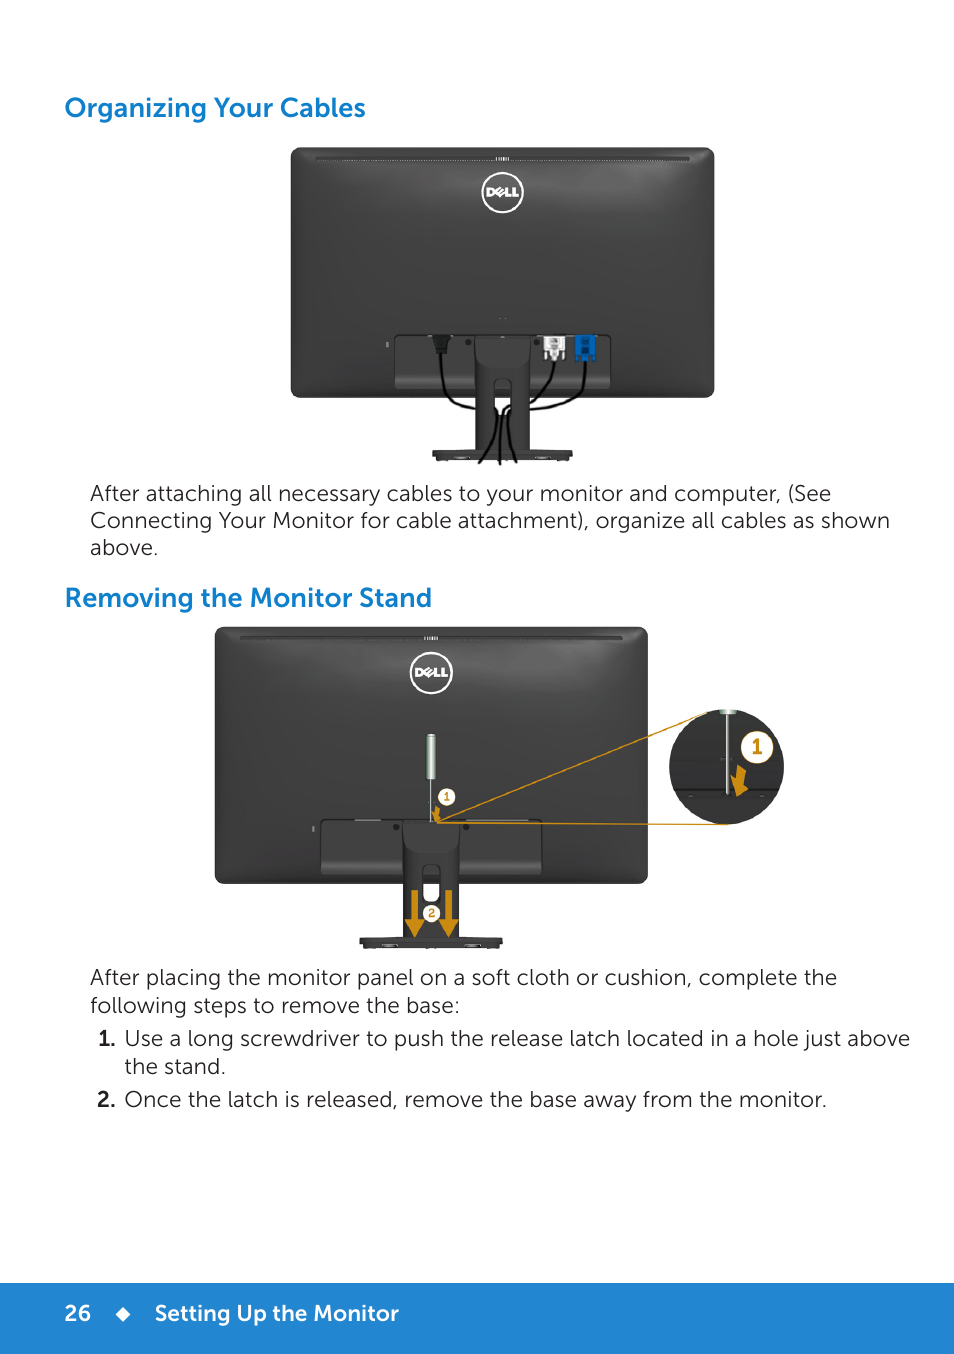 Organizing your cables, Wall mounting (optional), Removing the monitor